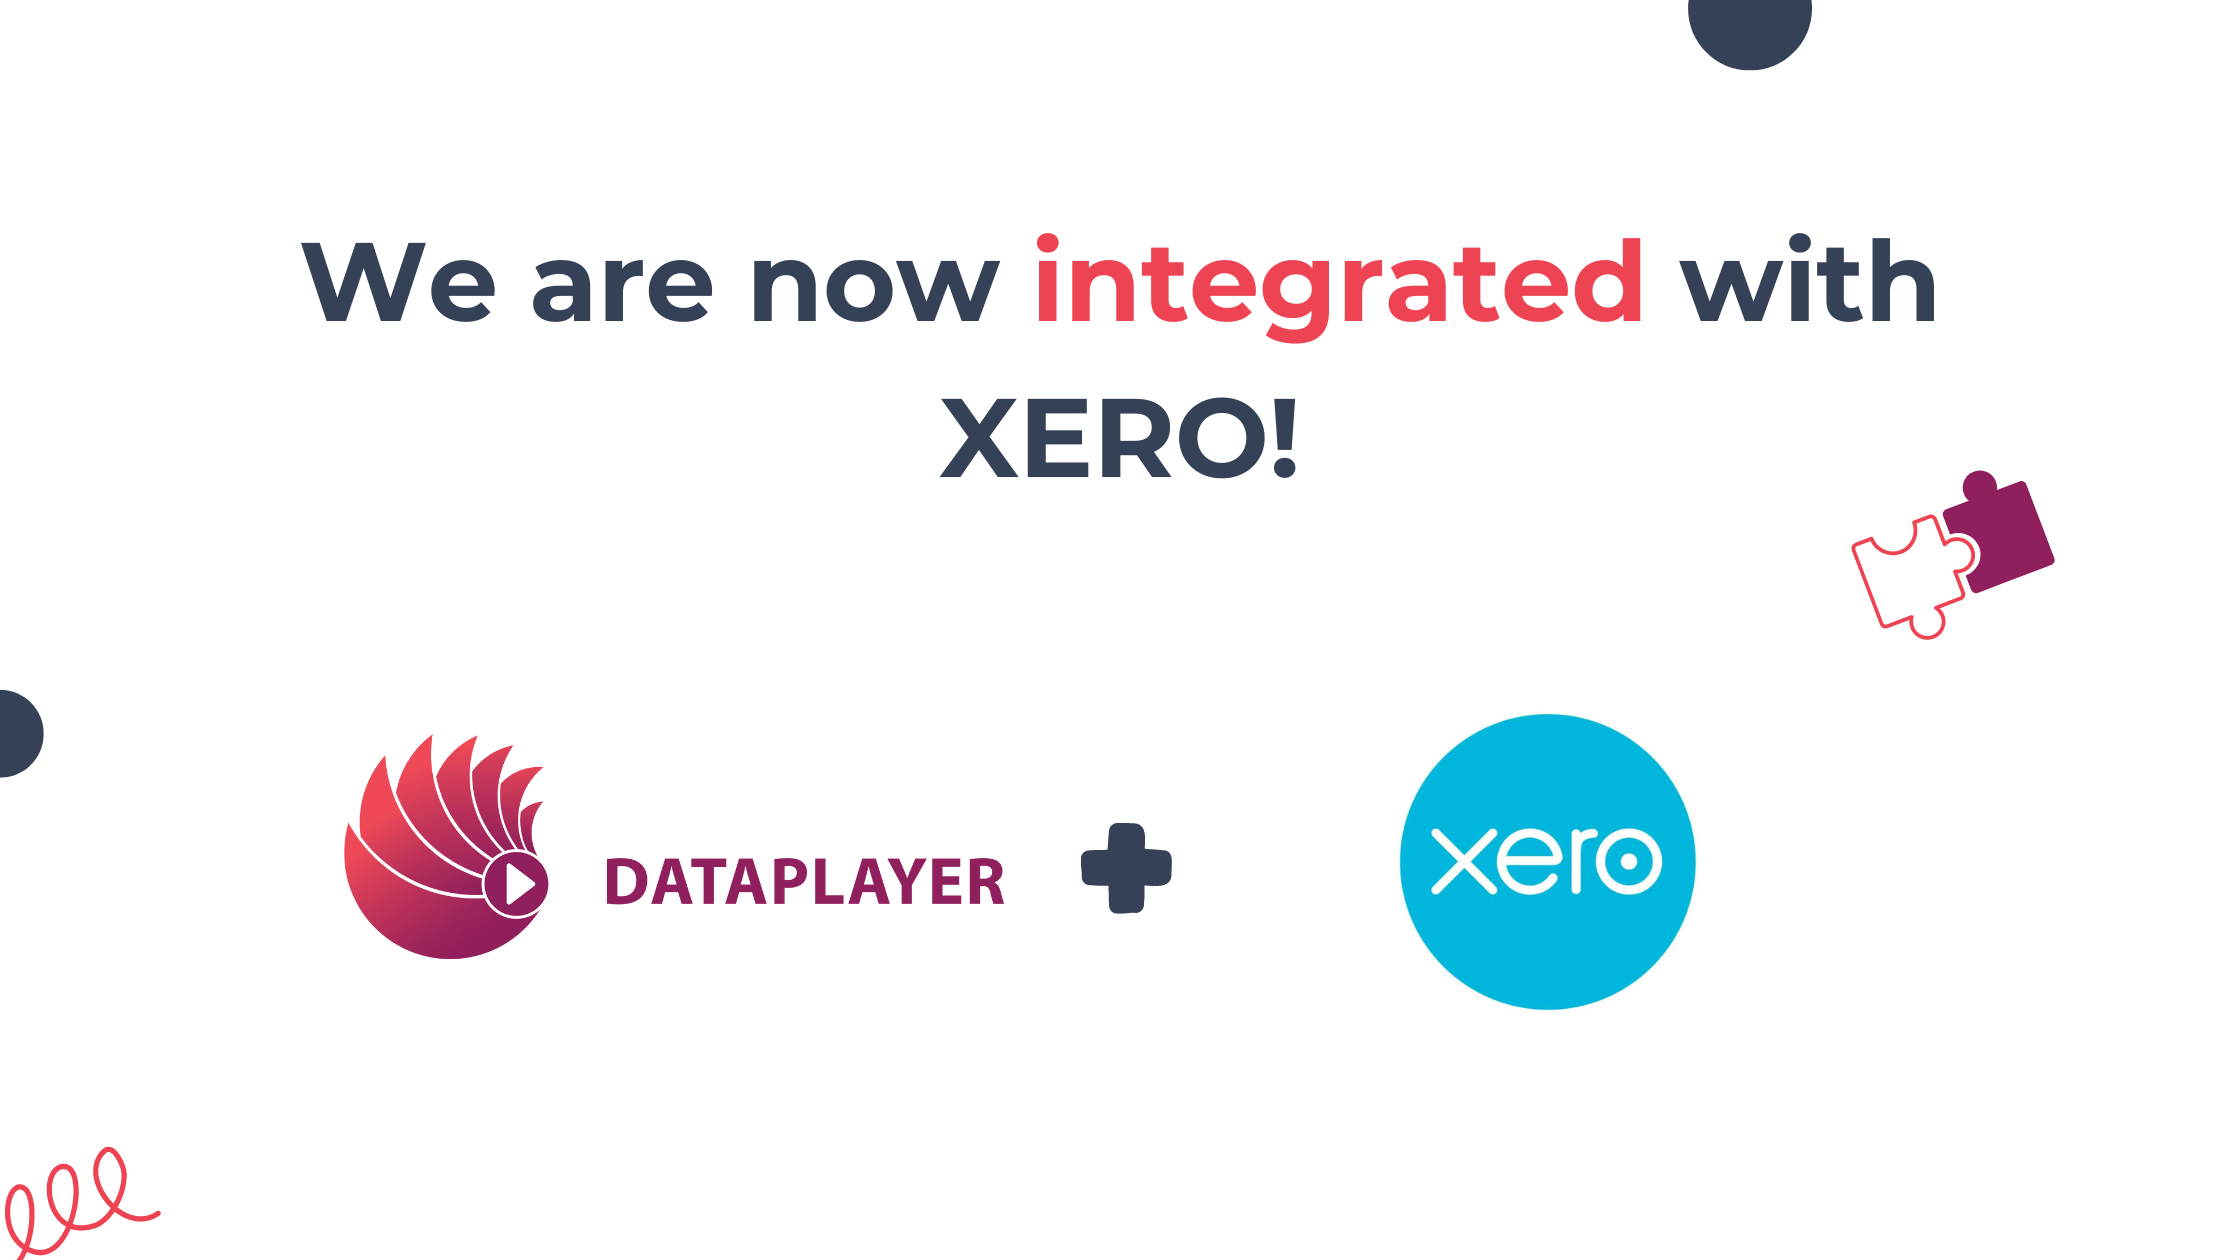 We are now integrated with XERO!